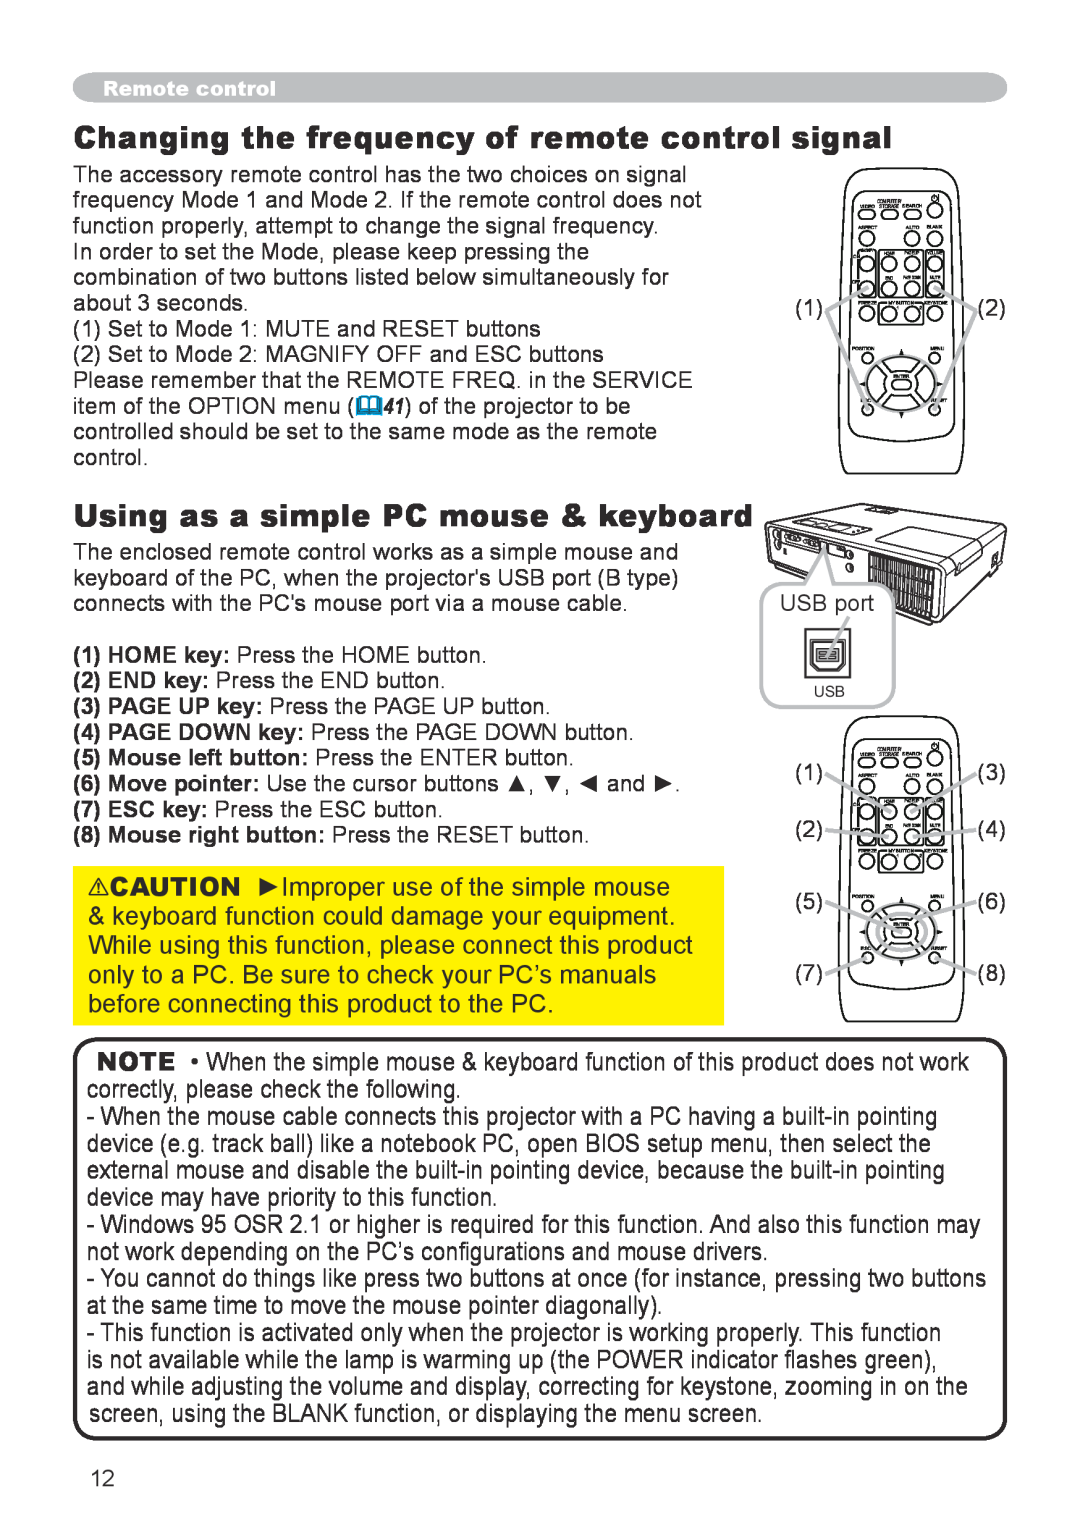 Apple CPX5, CPX1 user manual Changing the frequency of remote control signal, Using as a simple PC mouse & keyboard 